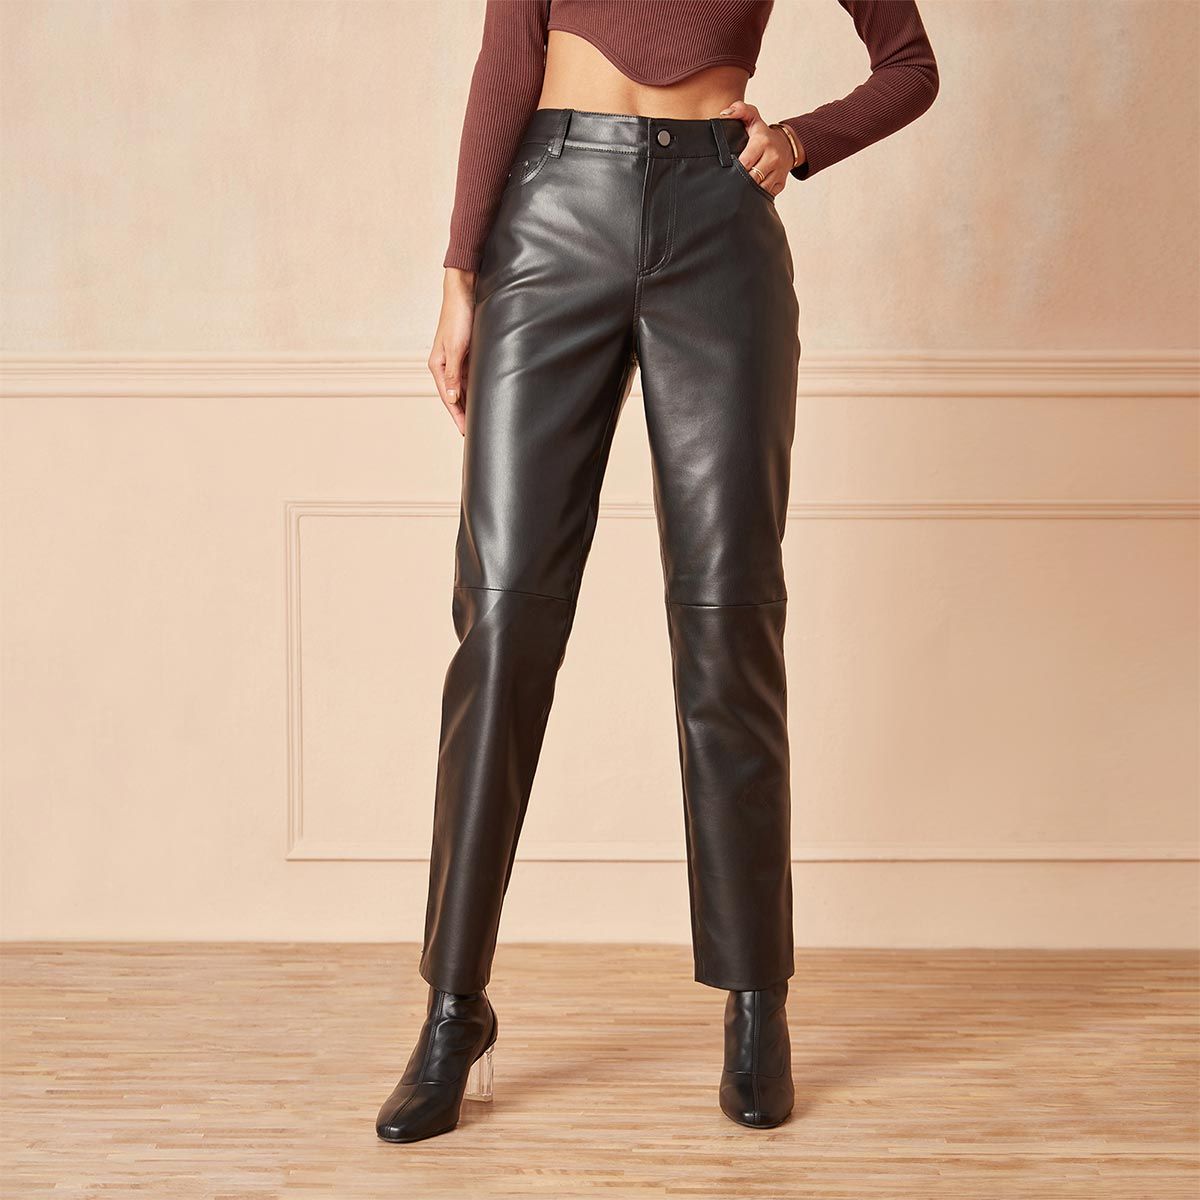 High Waist Black PU Leather Cargo Pants For Fashionable Girls Spring  Fashion Streetwear Punk Faux Leather Trousers D30 201119 From Dou04, $16.77  | DHgate.Com